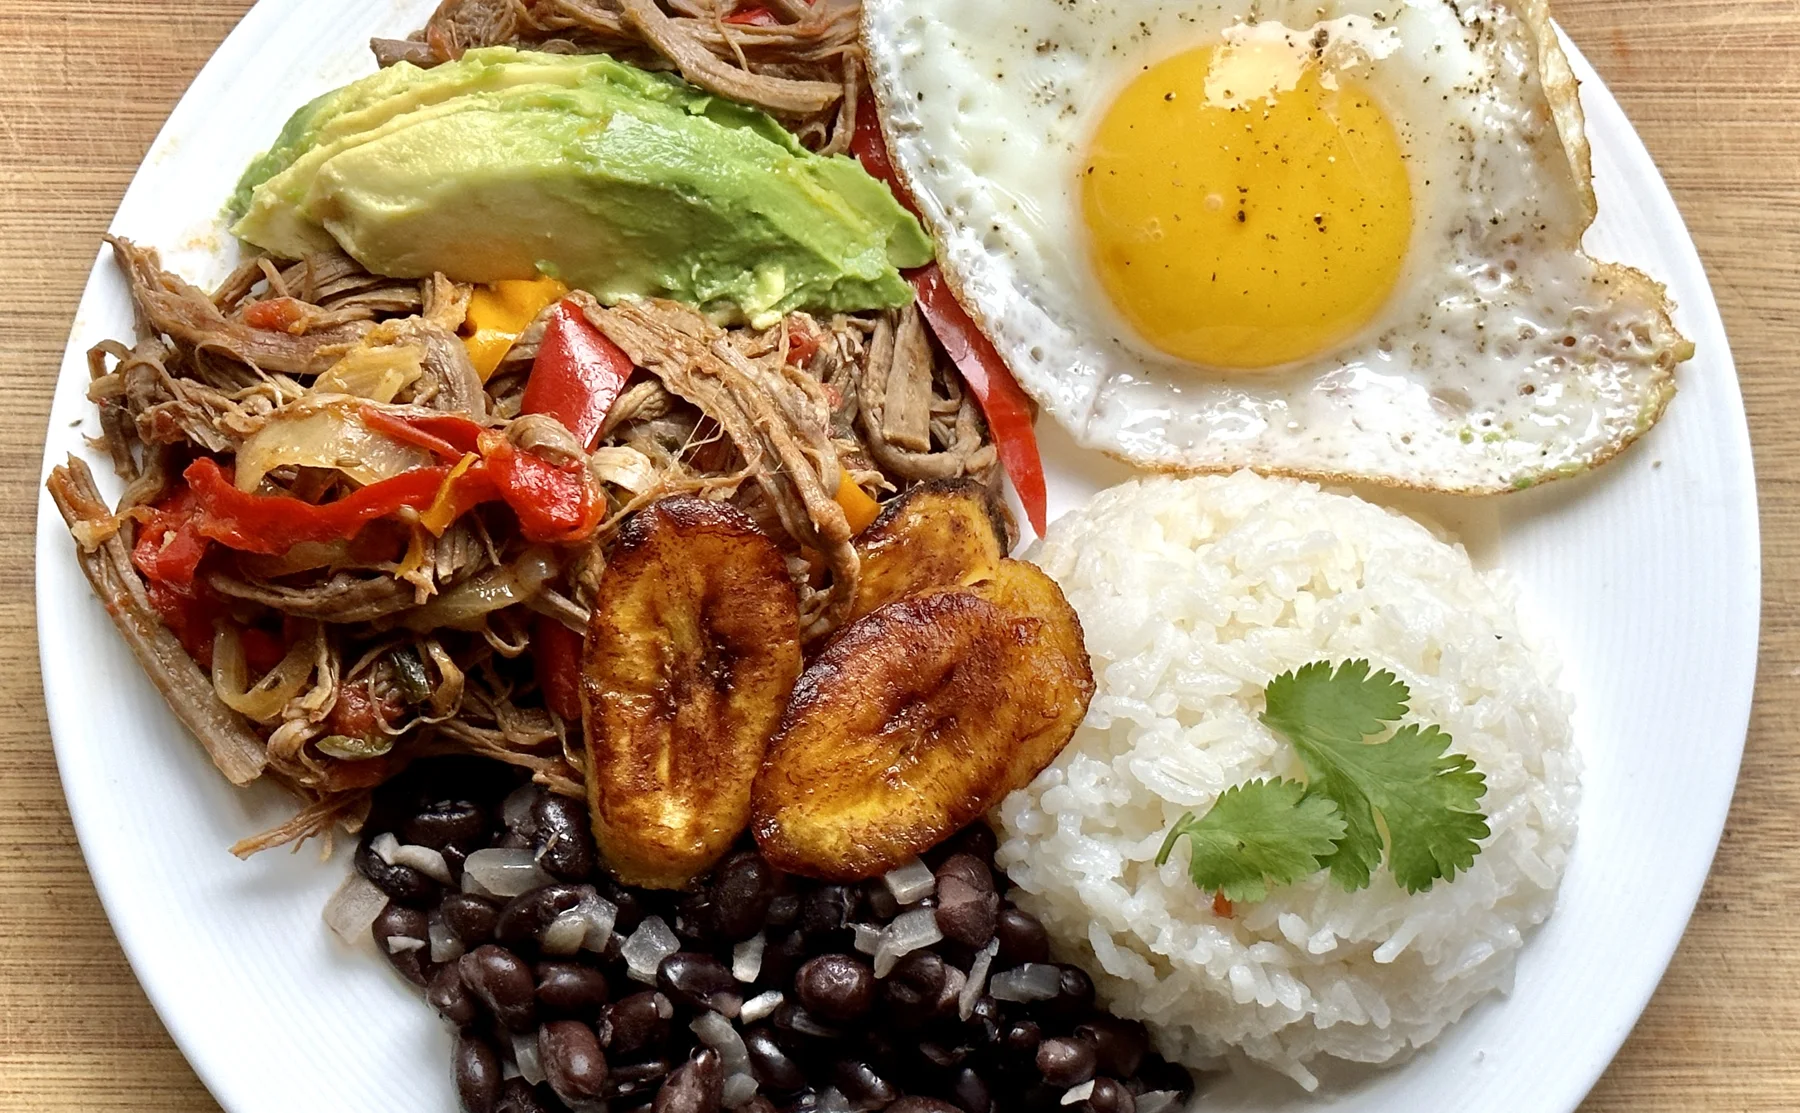 Experience the flavors of Venezuela at brunch in Brooklyn  - 1494943